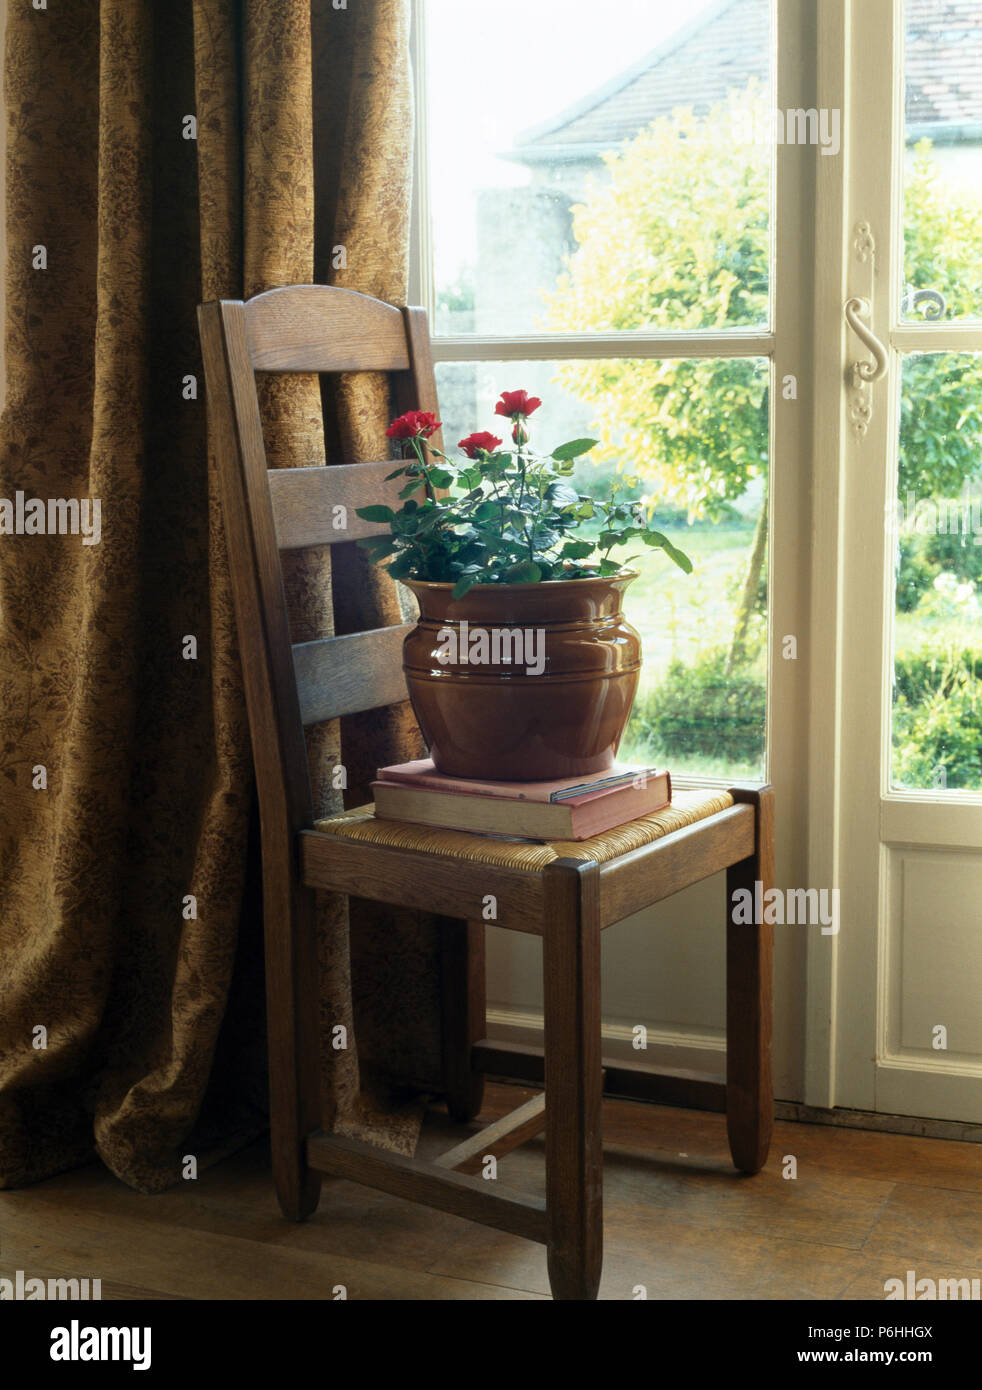 Flowering plant in earthenware pot on rustic rush-seated chair in front of French windows with patterned brown drapes Stock Photo